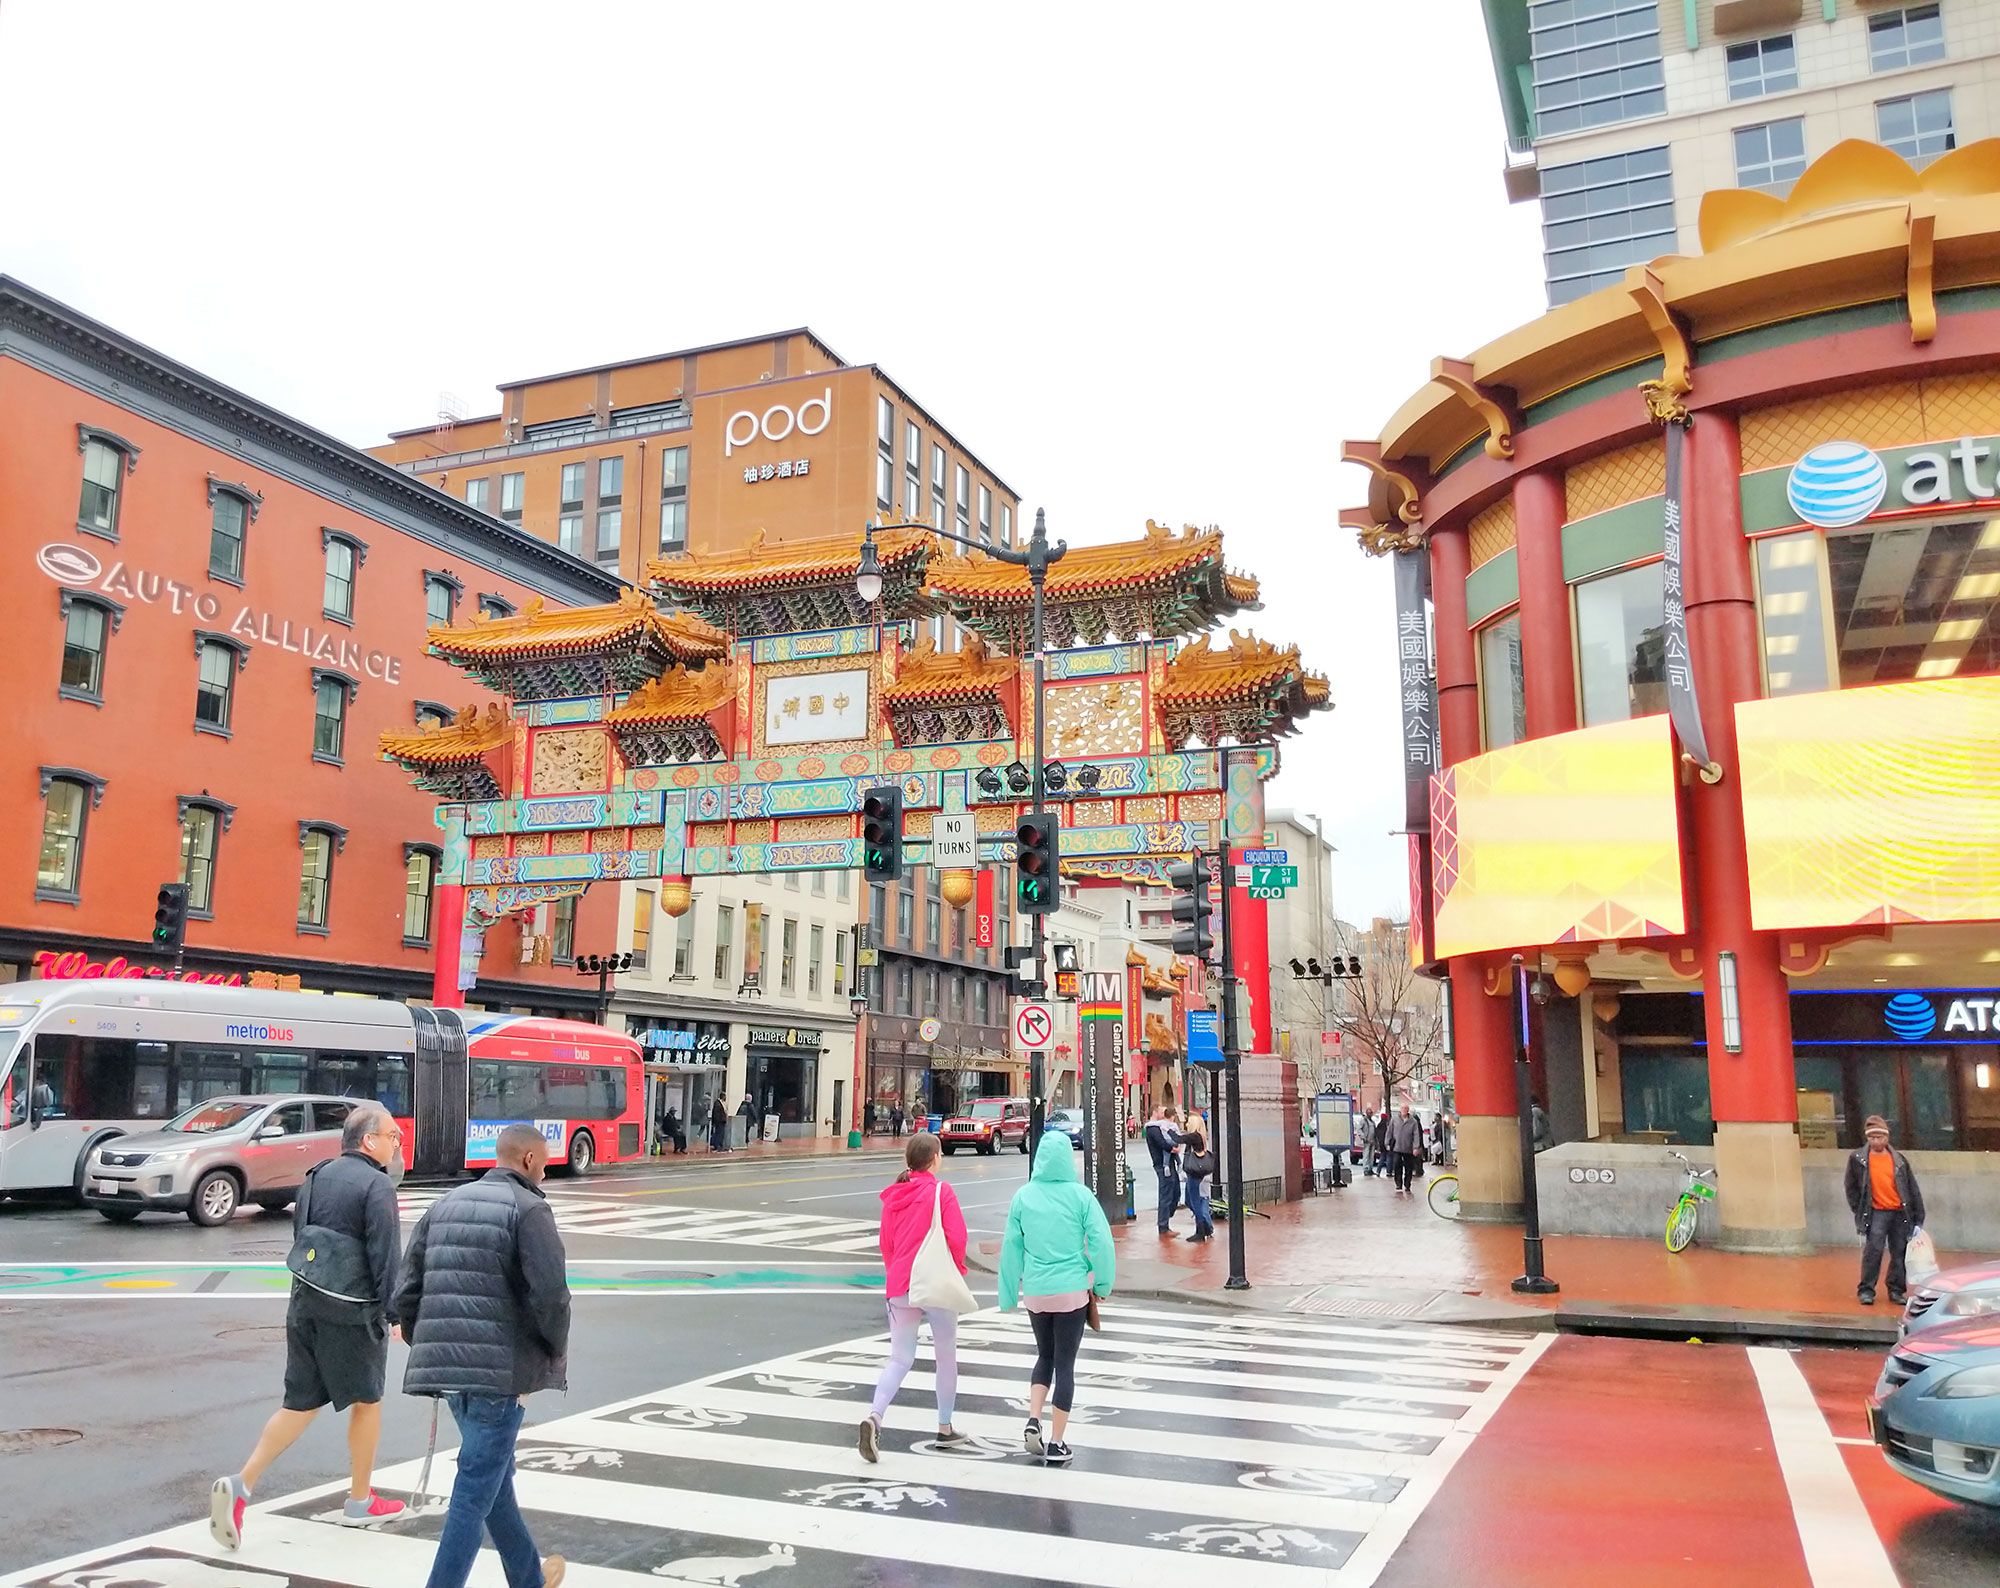 Washington D.C.'s Chinatown District on a rainy weekend afternoon.